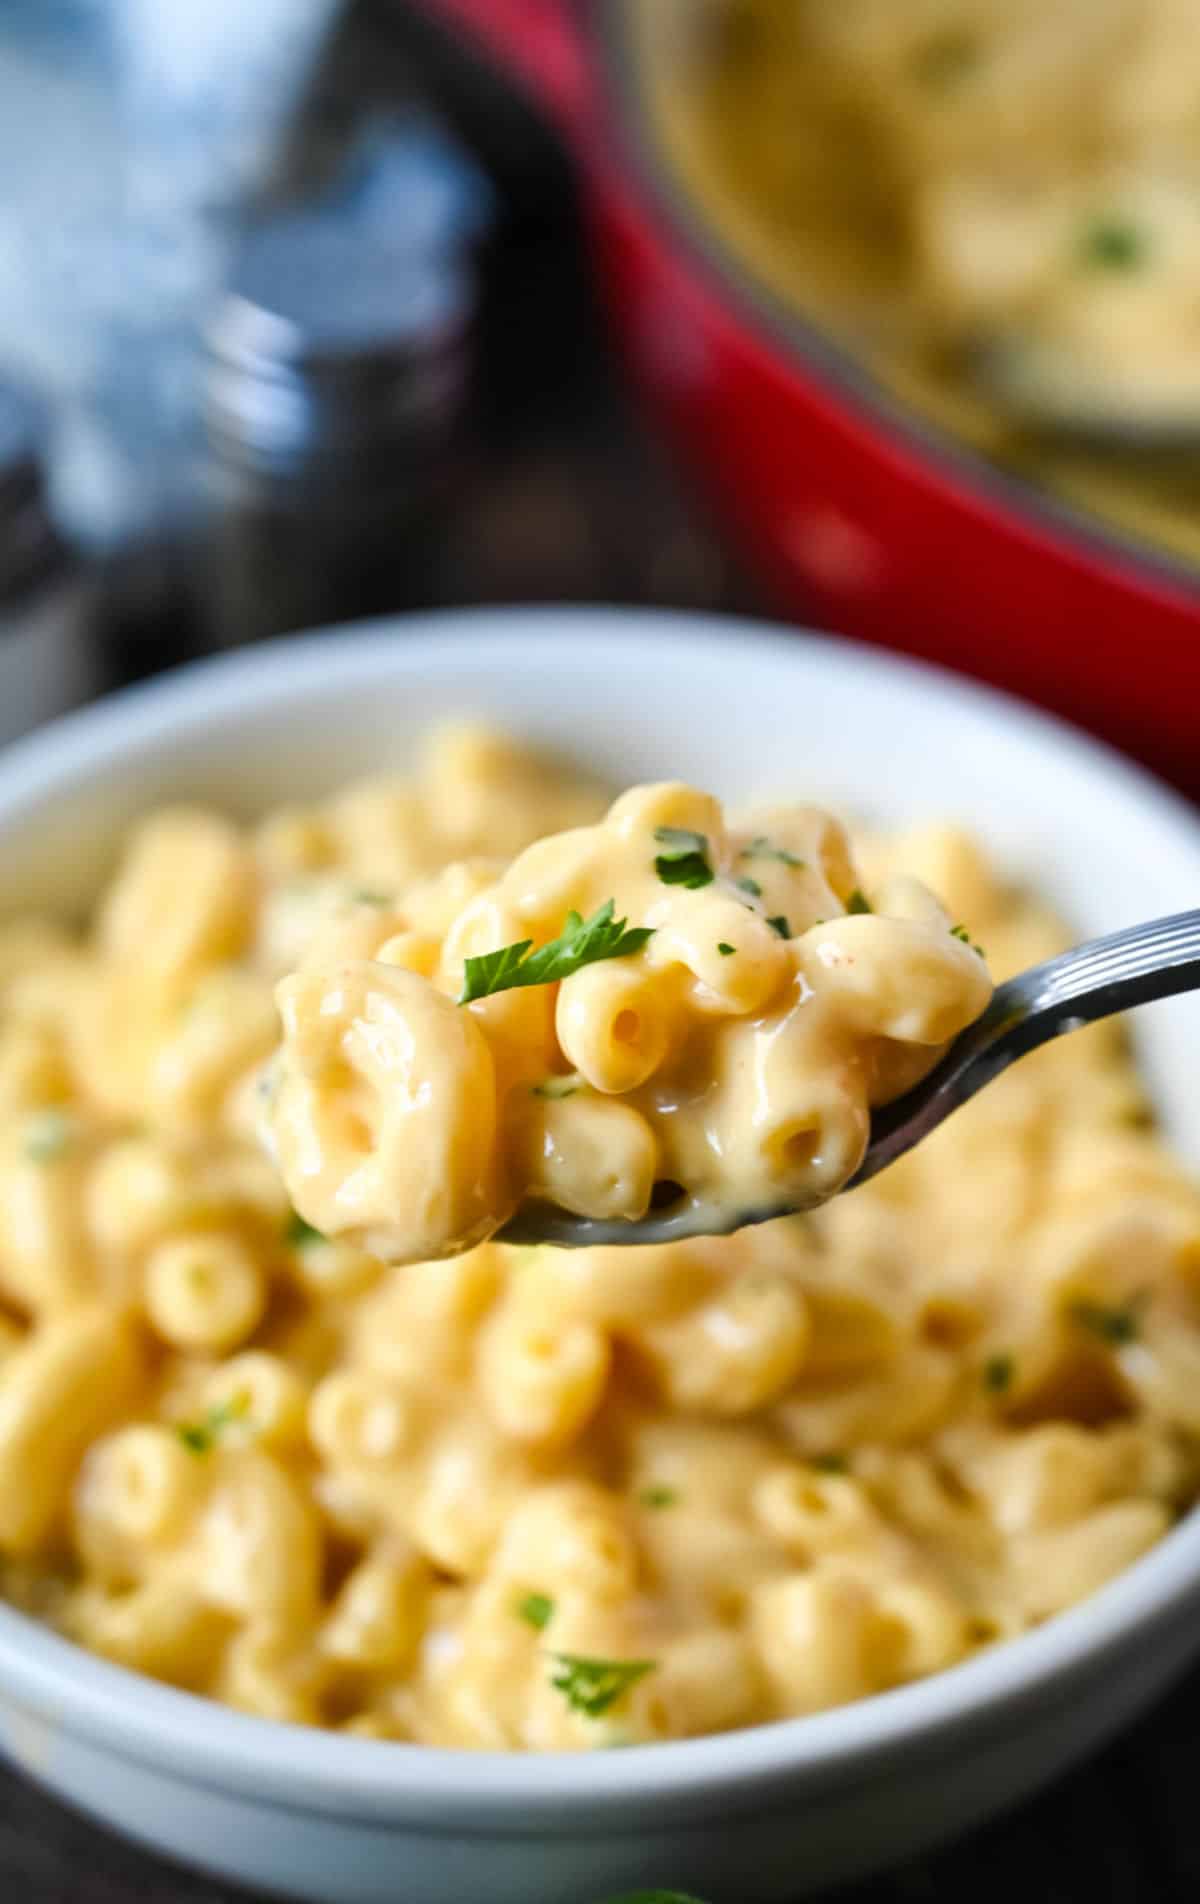 A spoon scooping a bite of stovetop macaroni and cheese.